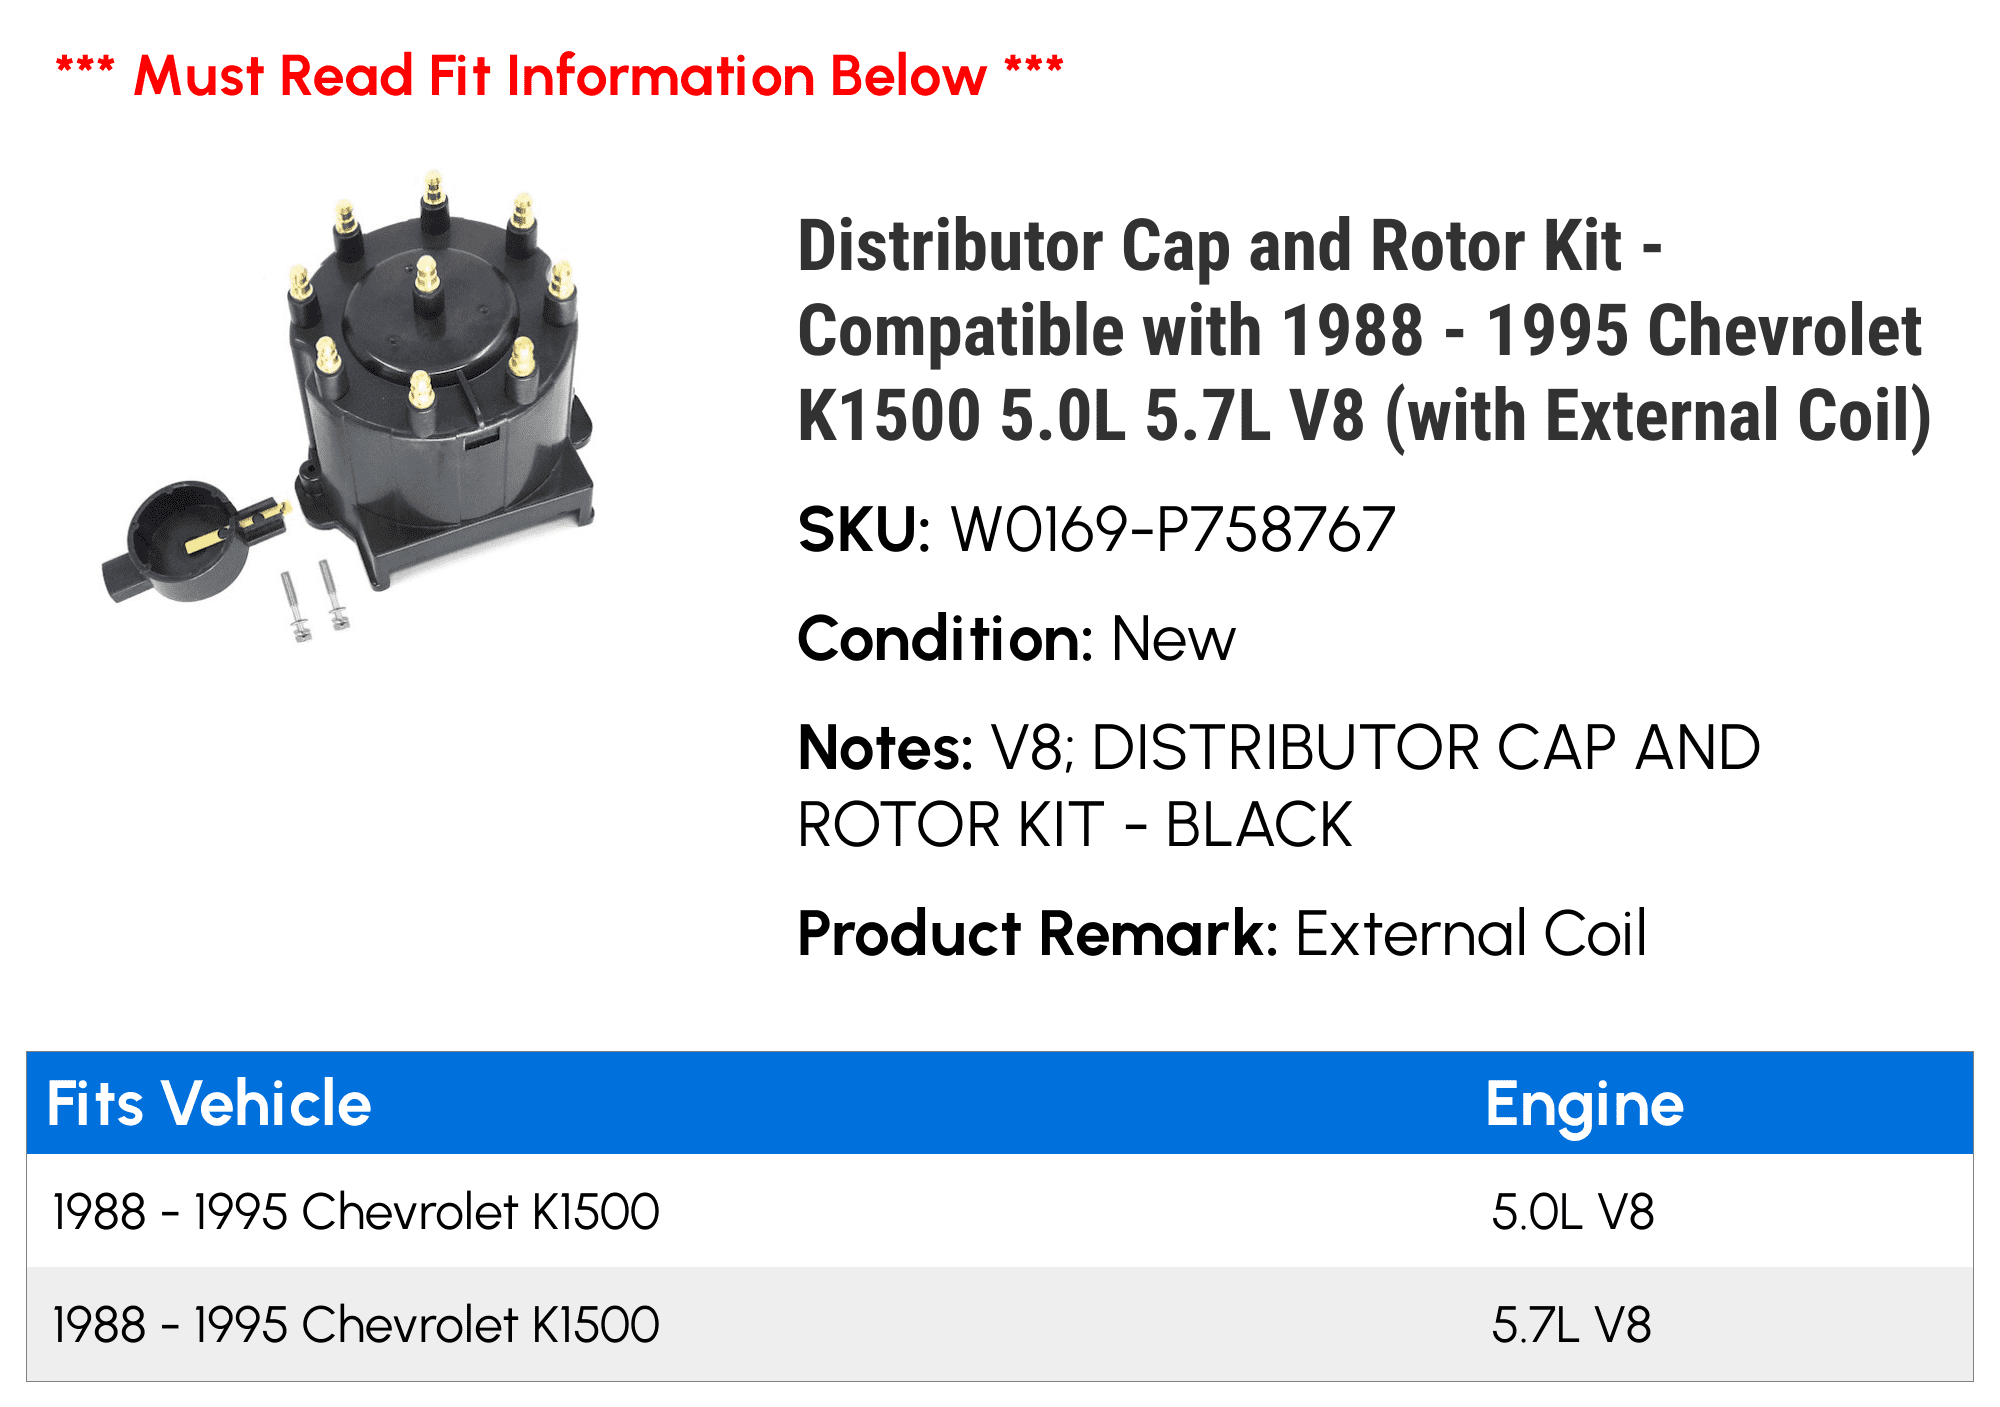 Black Distributor Cap and Rotor Kit Compatible with 1988-1995 Chevy C1500 Gas V8 with External Coil 